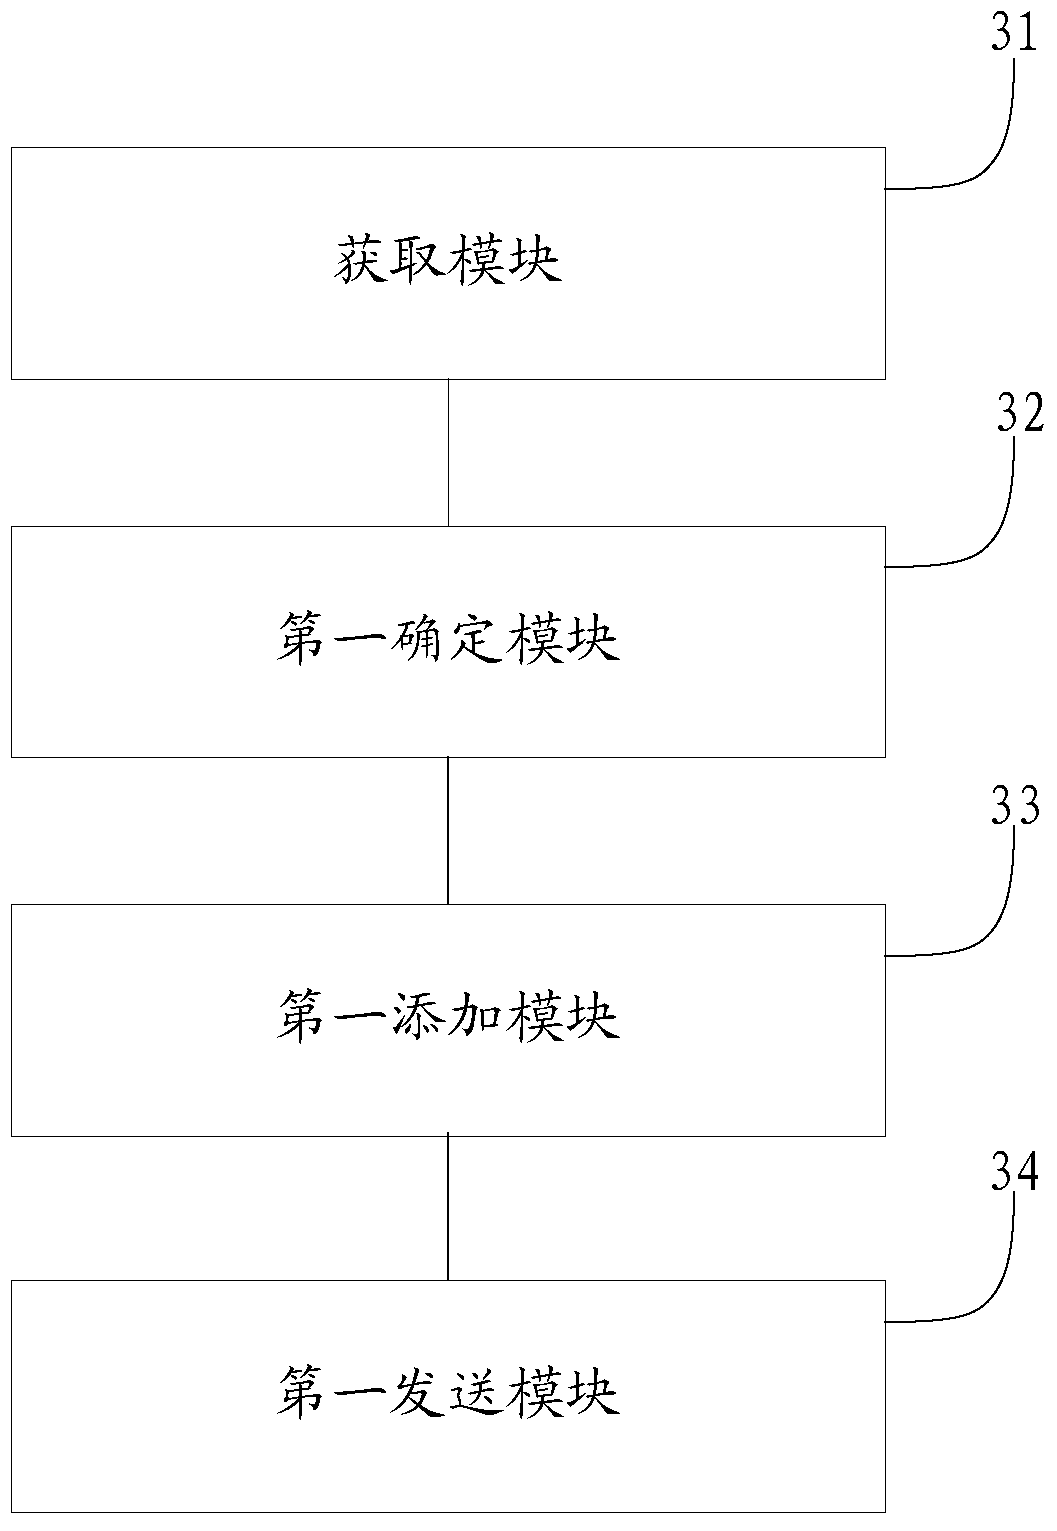 A server connection method and device